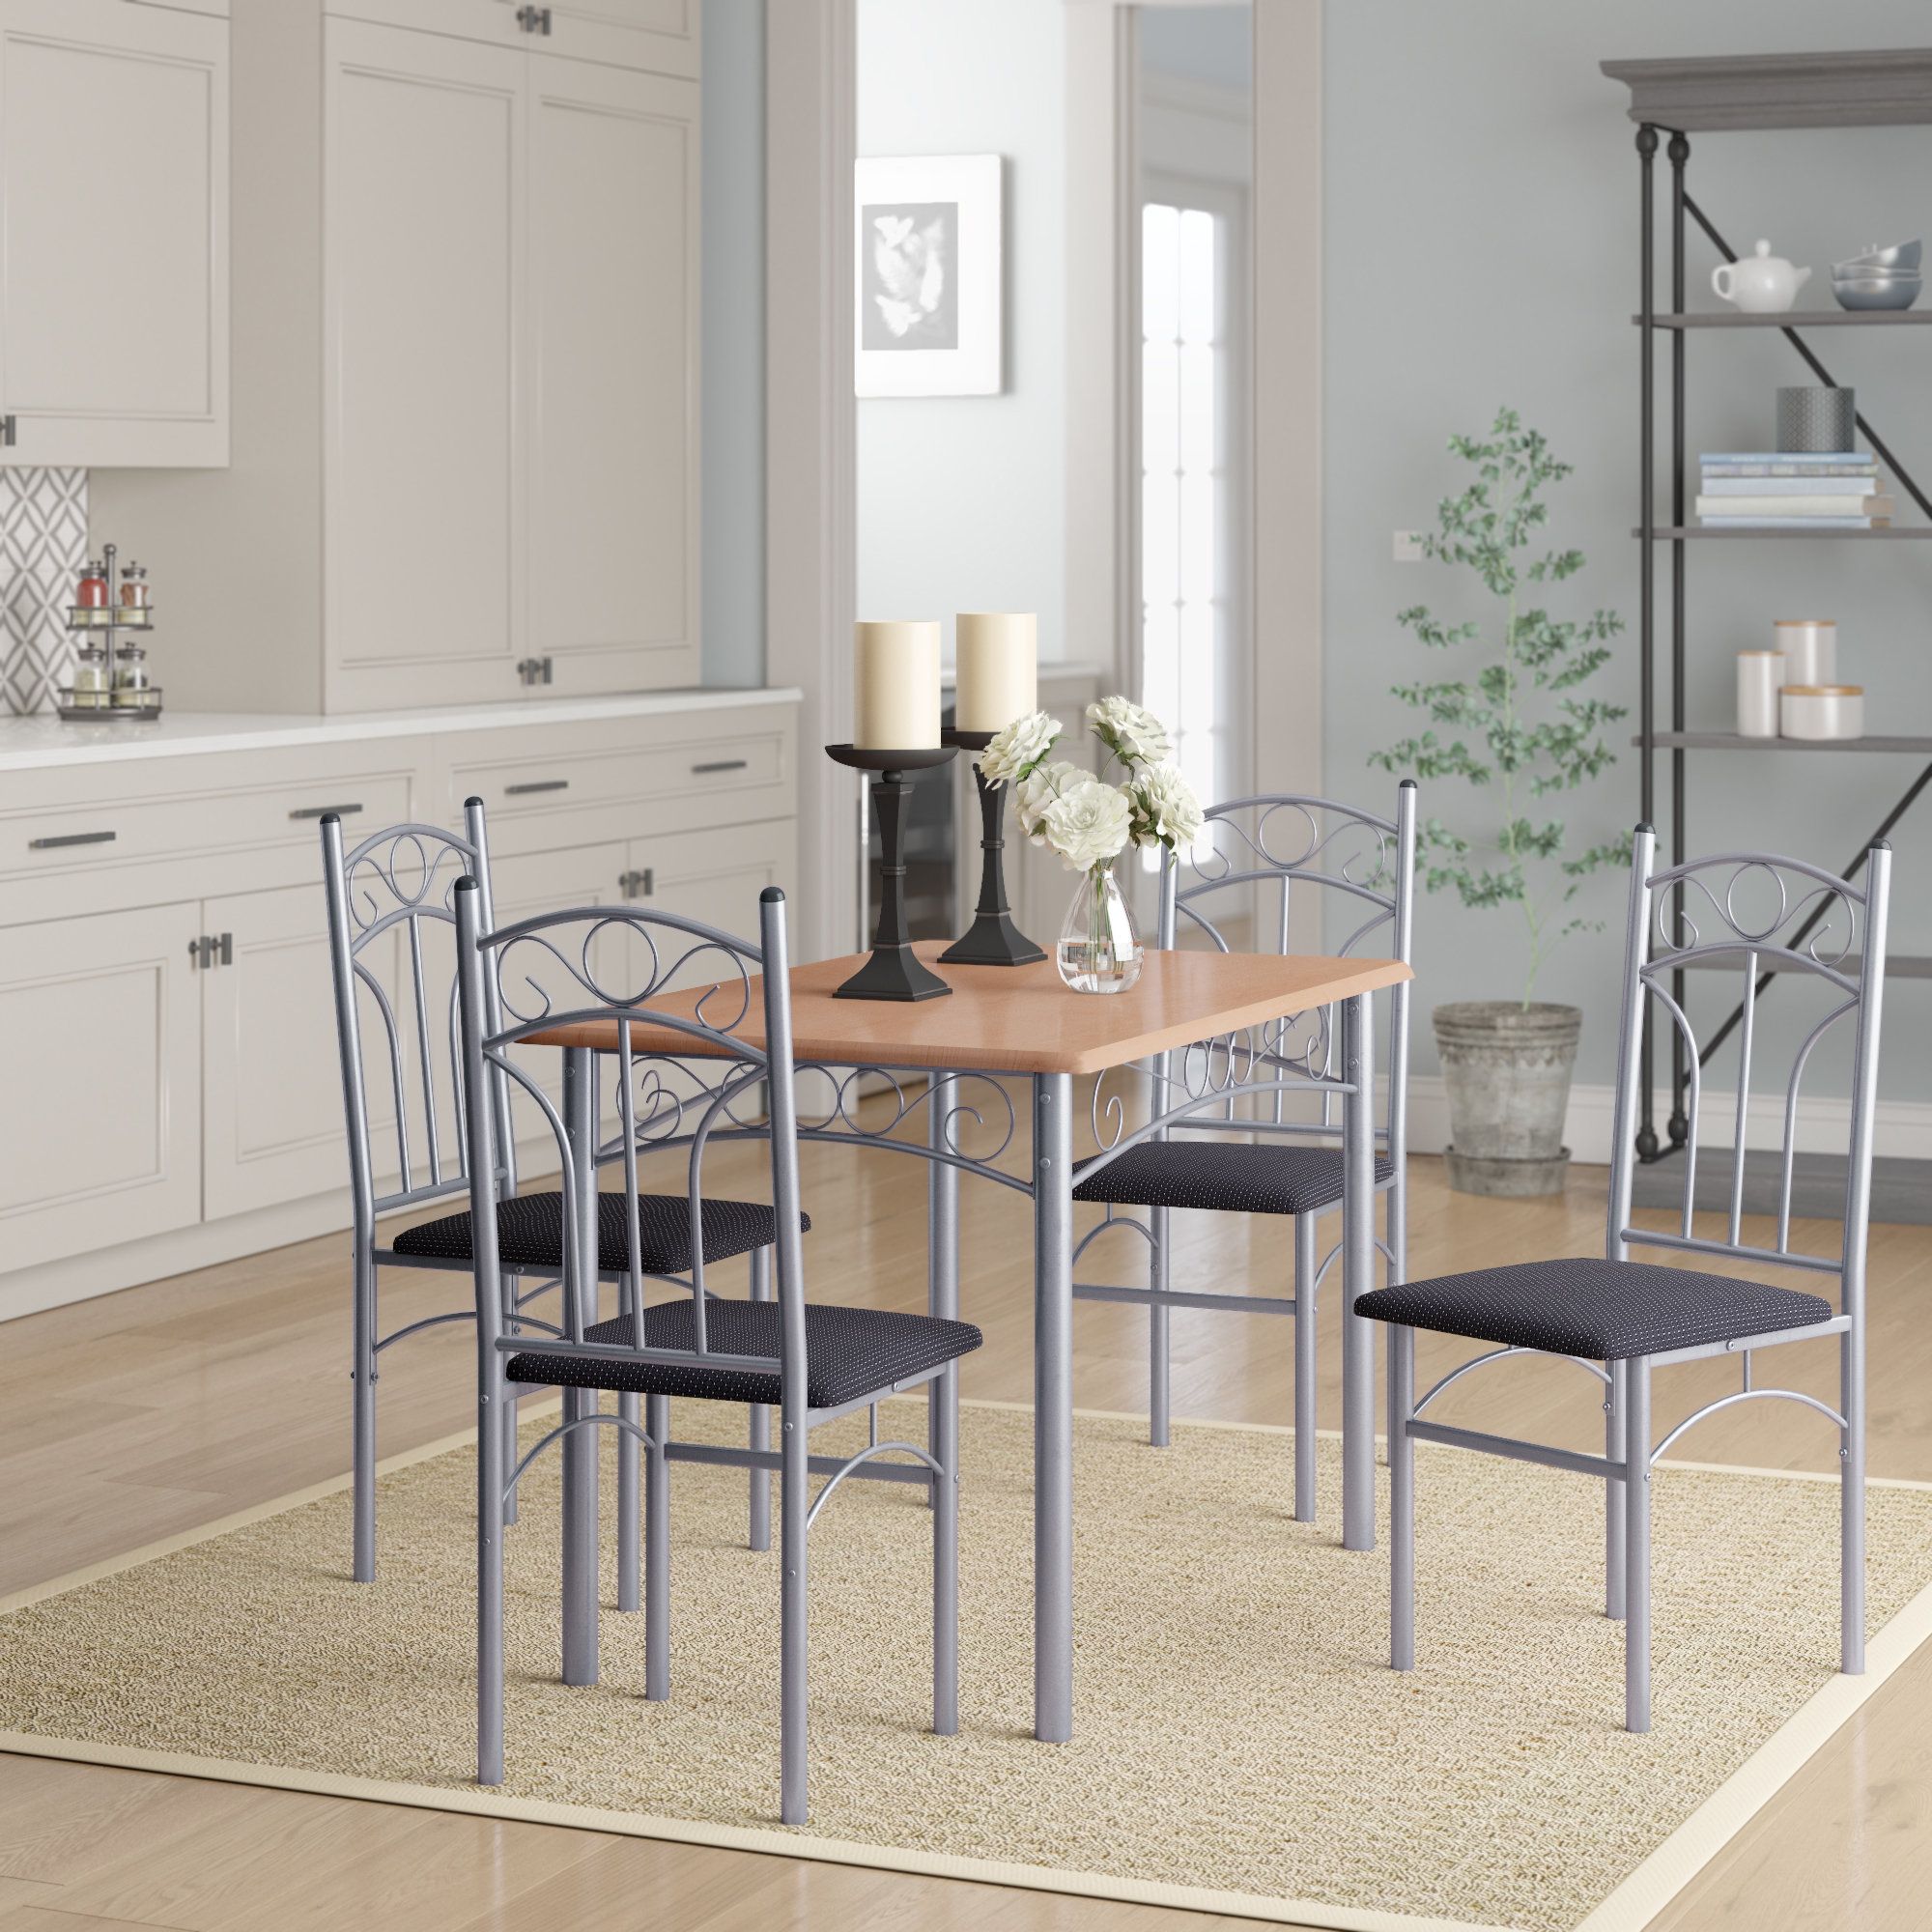 Opalstone 5 Piece Dining Set For Most Popular Honoria 3 Piece Dining Sets (View 11 of 20)